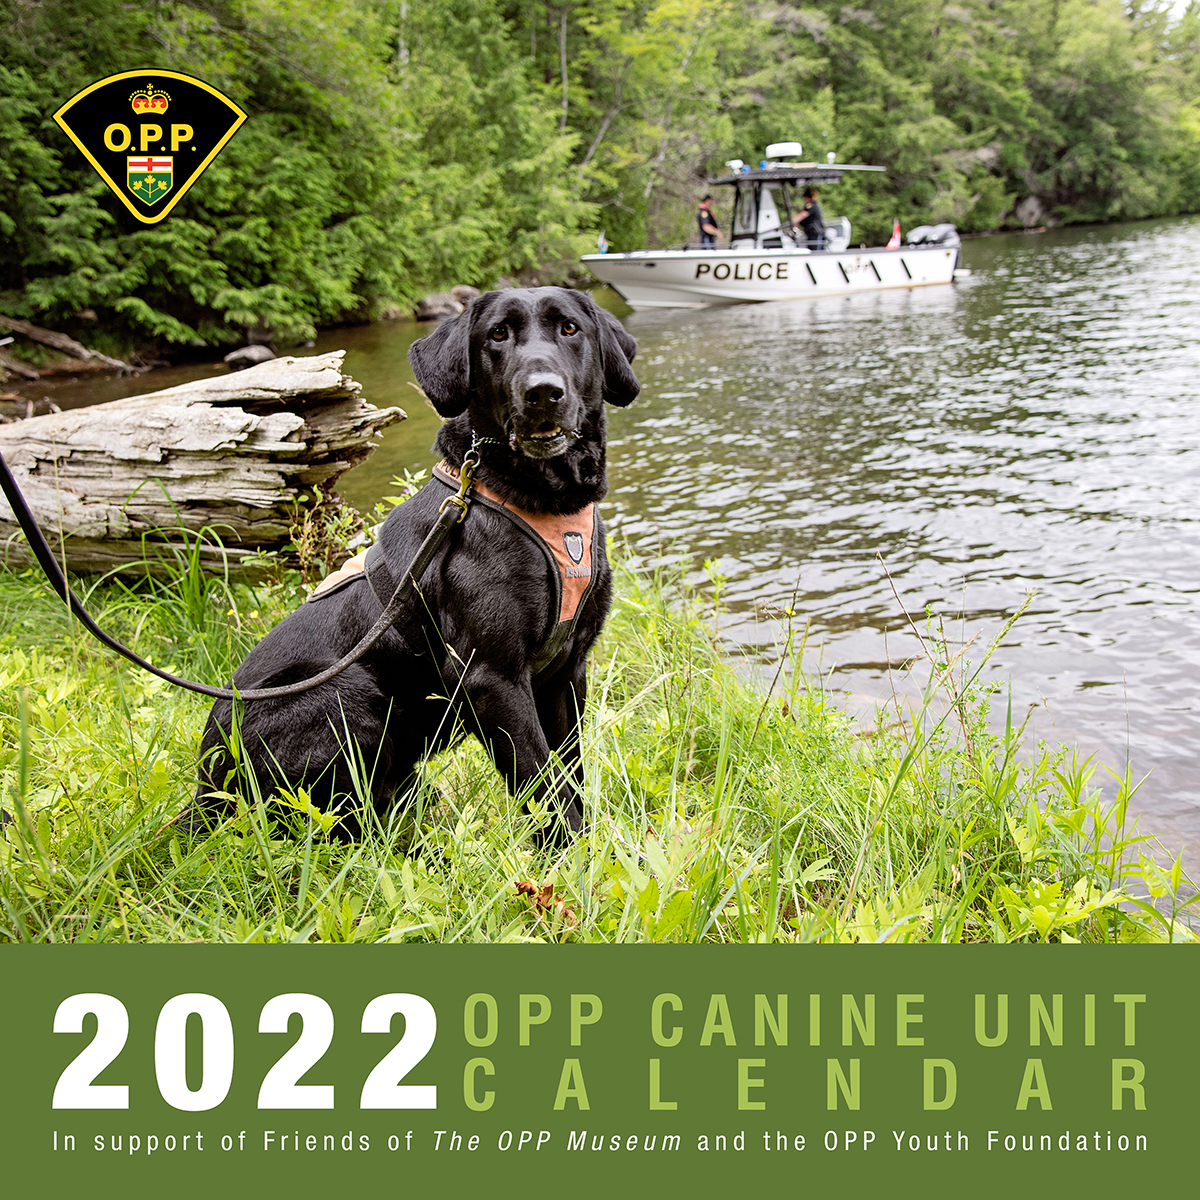 opp-selling-canine-unit-calendars-to-benefit-charities